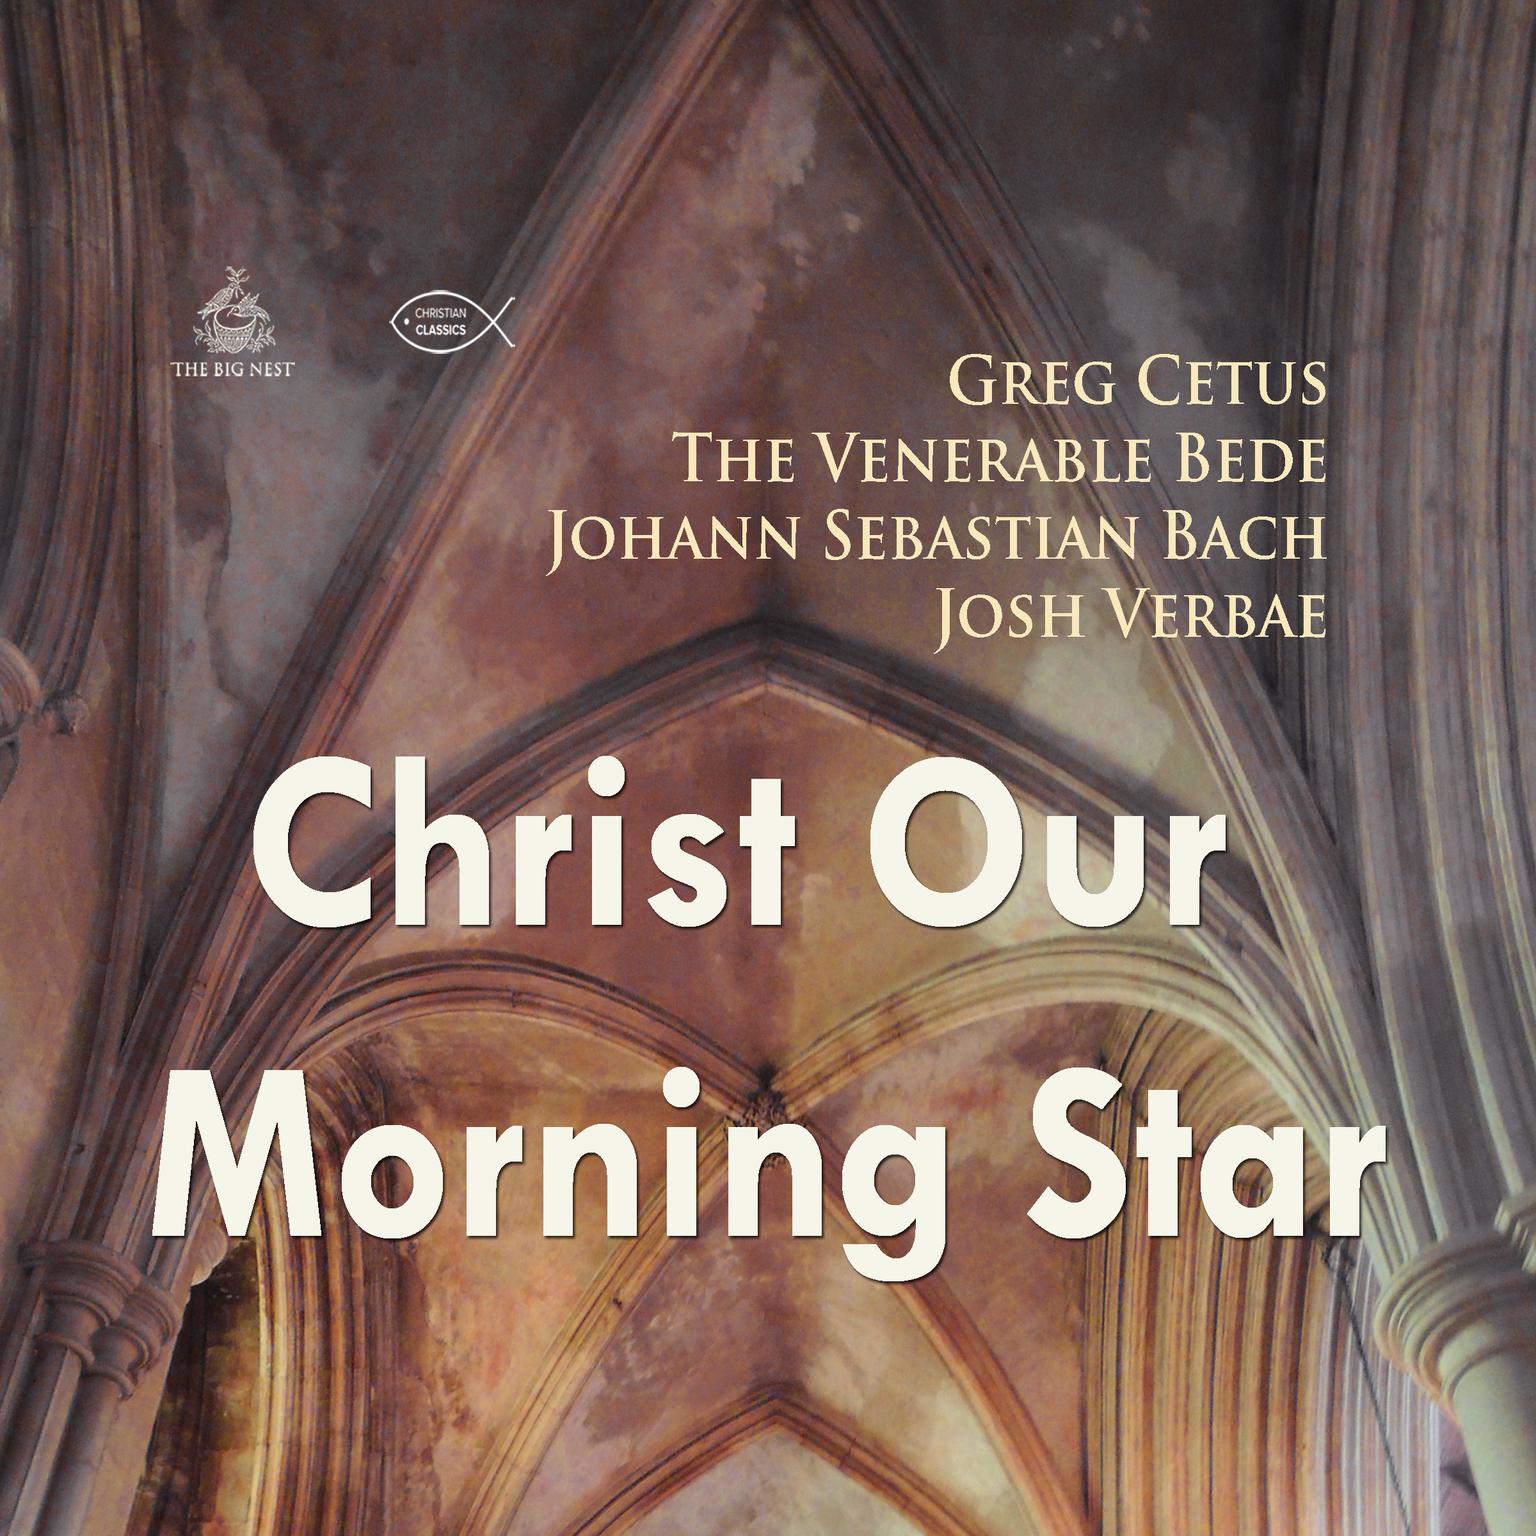 Christ Our Morning Star Audiobook, by The Venerable Bede